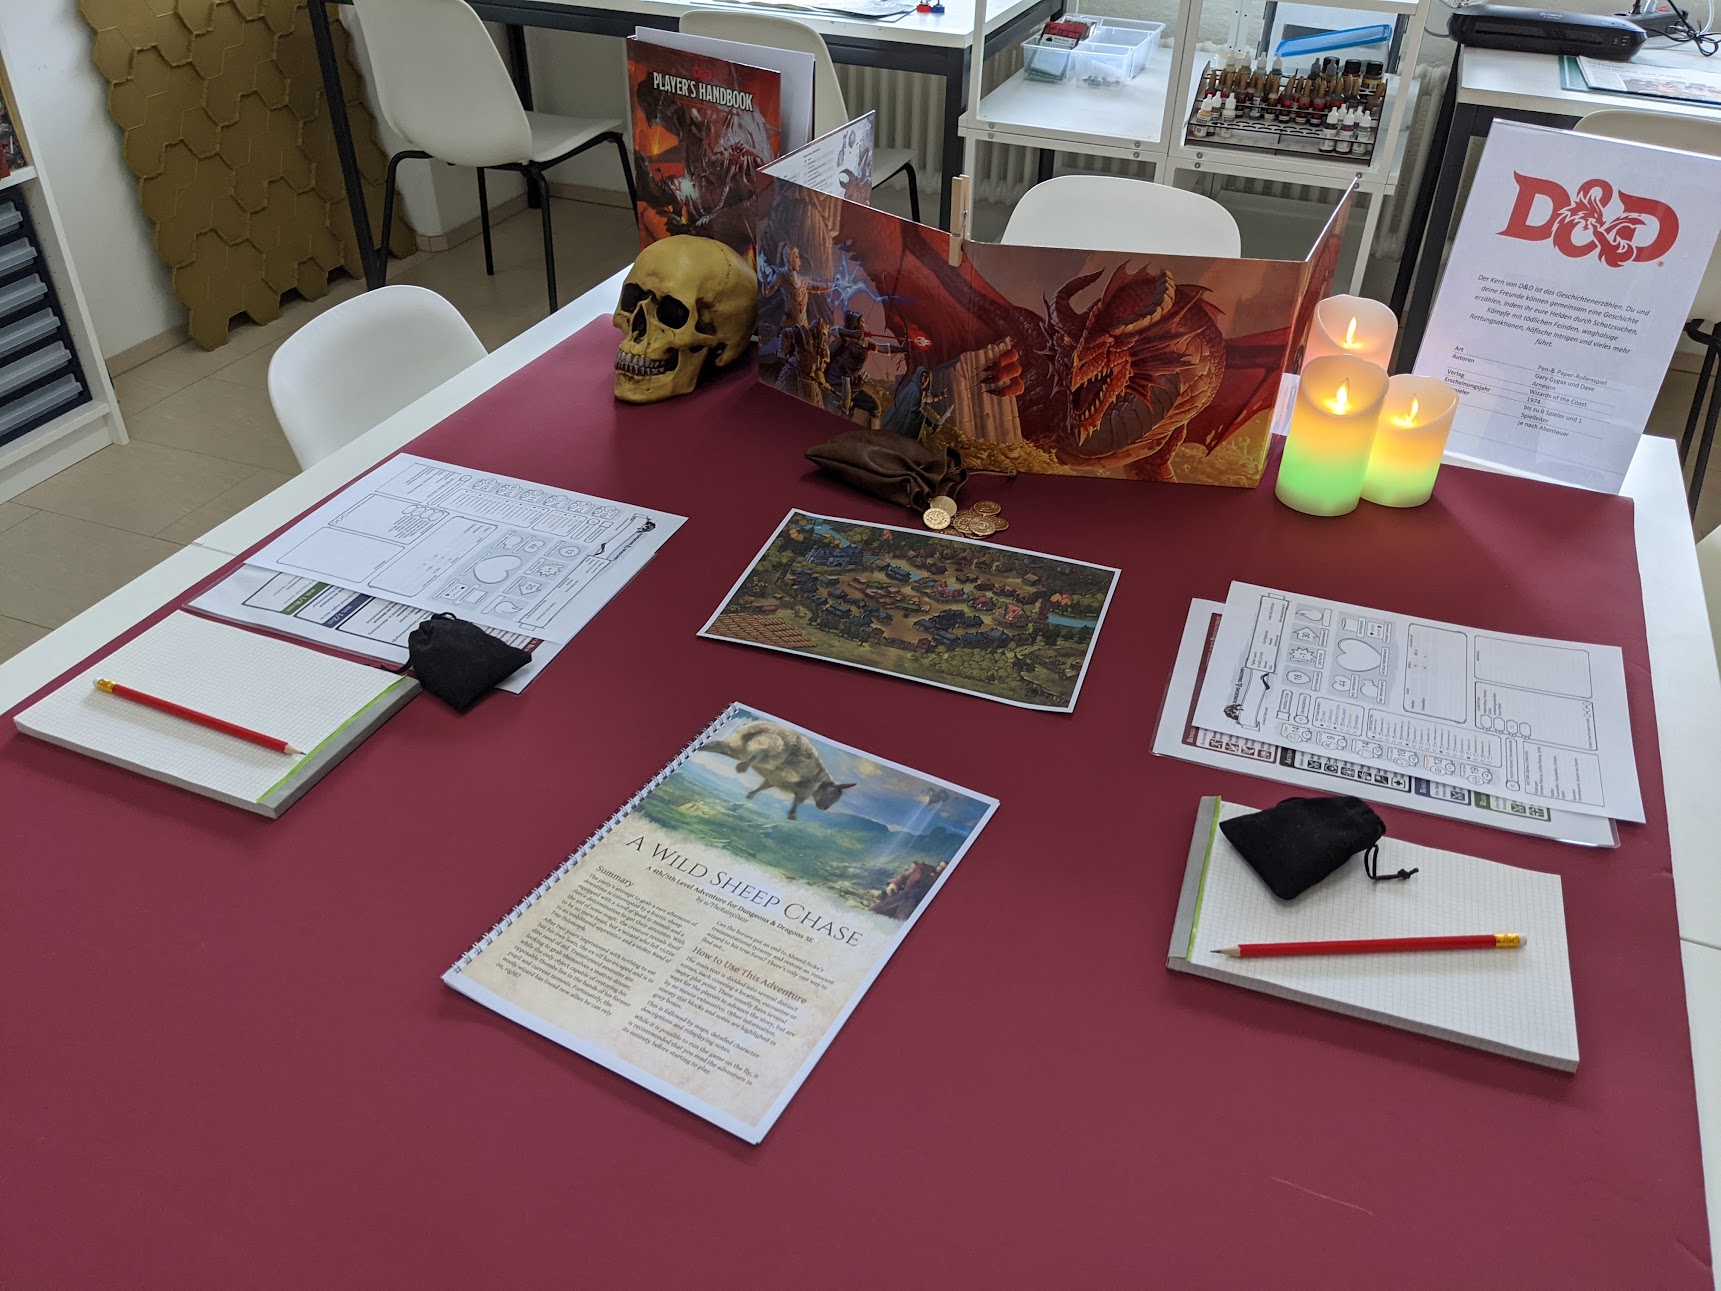 Dungeons & Dragons demo adventure is set-up